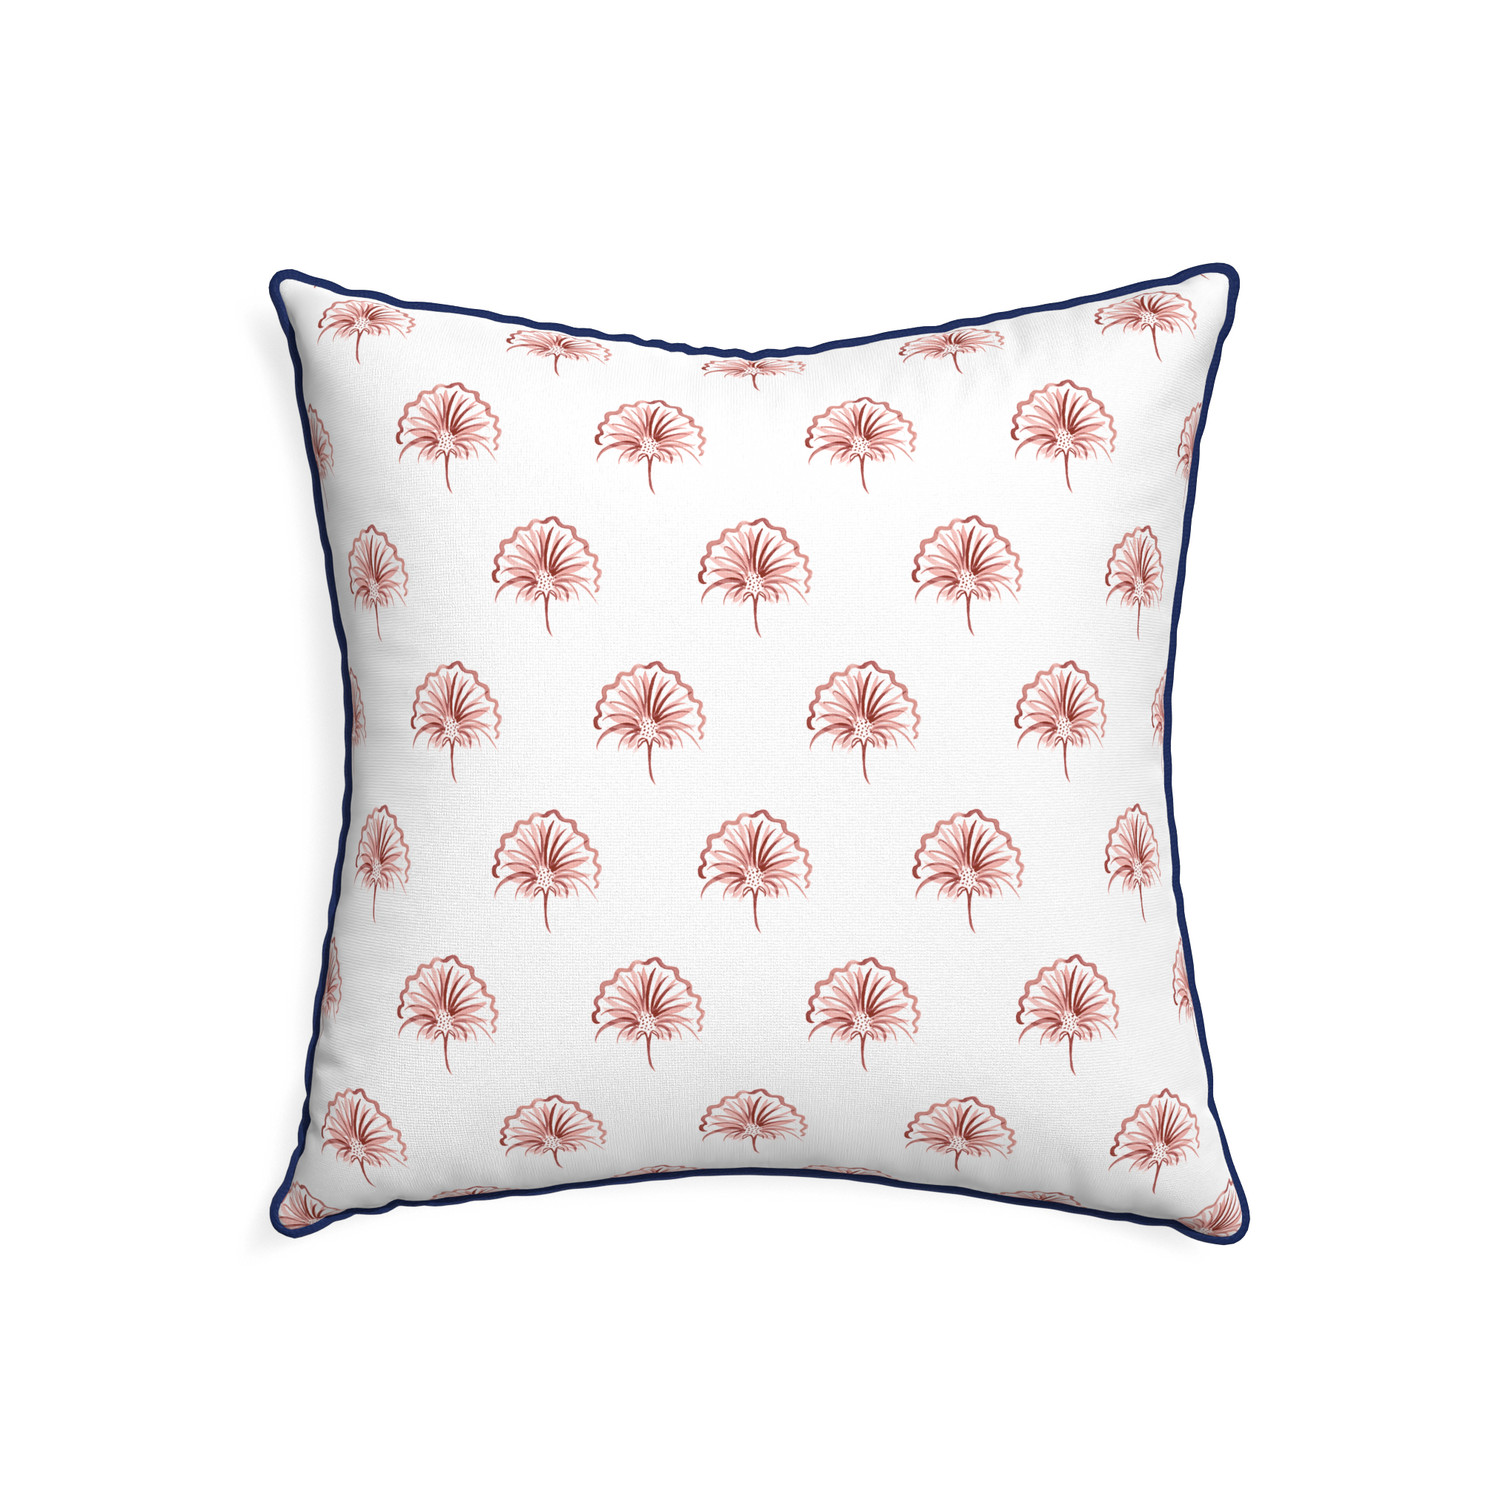 22-square penelope rose custom pillow with midnight piping on white background